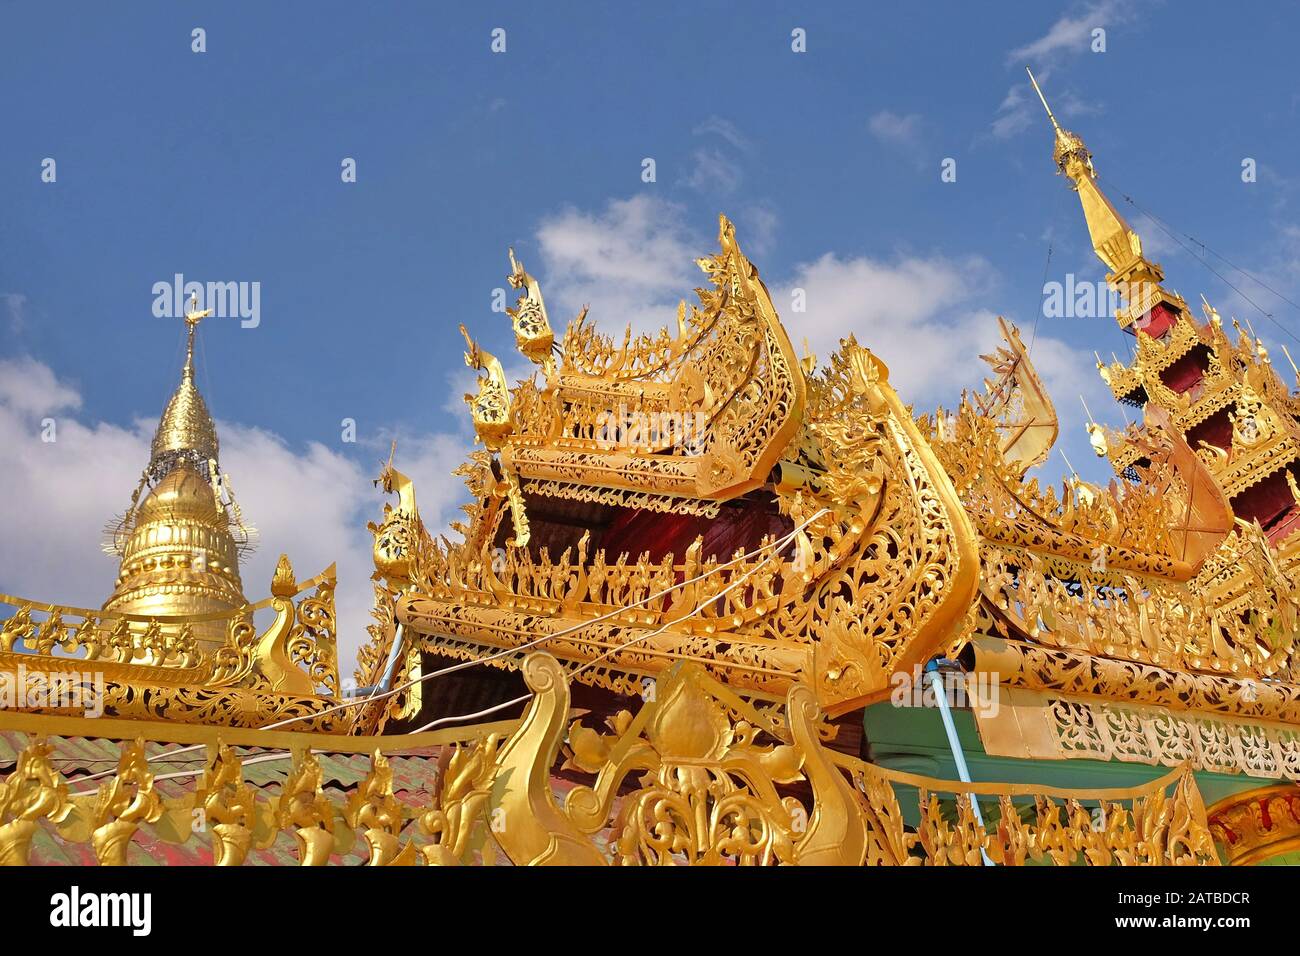 View of the golden roof of a Burmese Pagoda in Mingun, Mandalay, Myanmar, against a blue sky covered by white clouds. Stock Photo